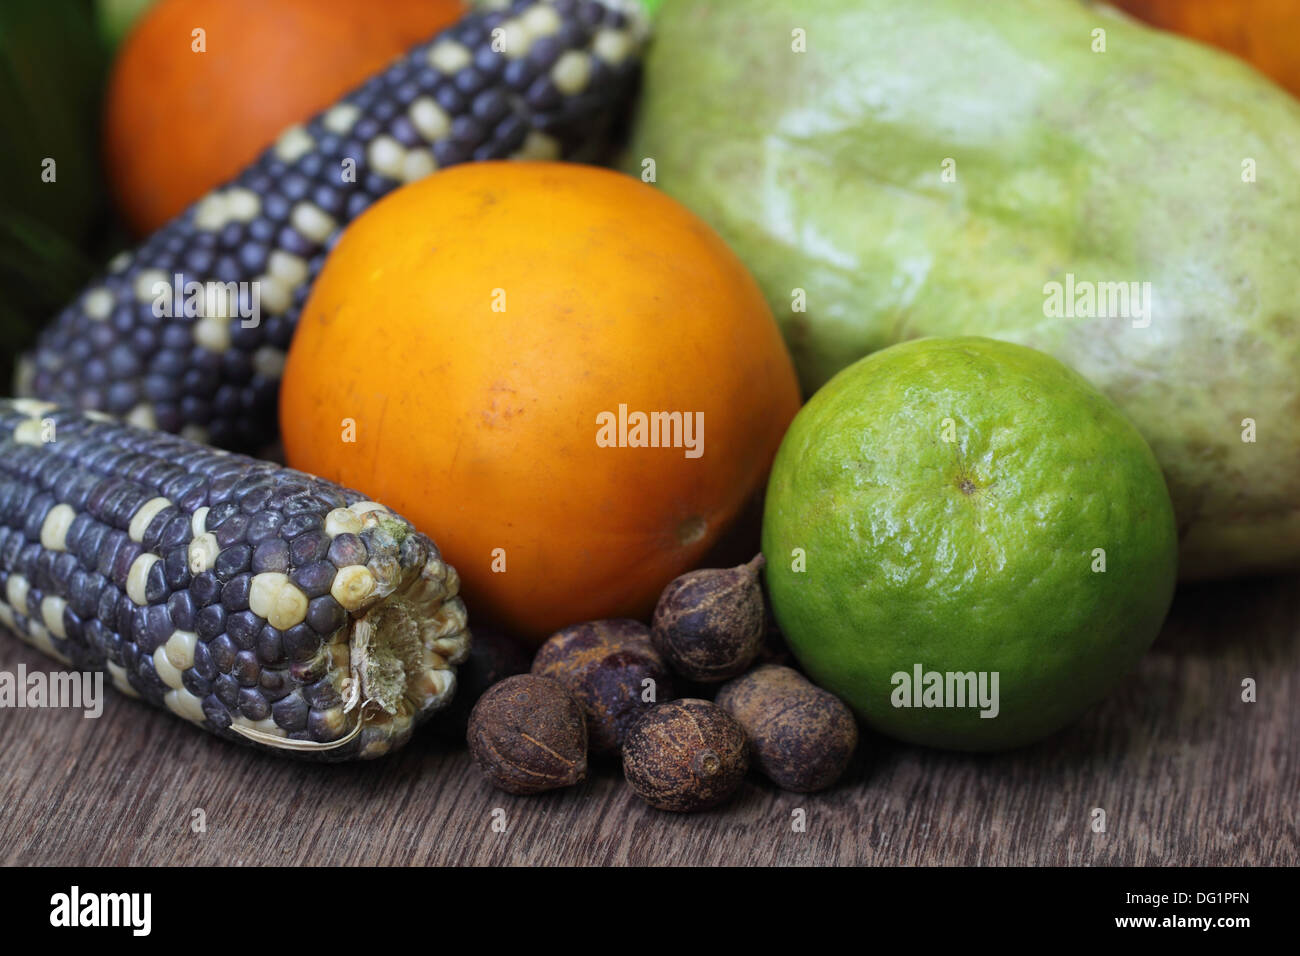 Fruits and Vegetables of Jhum Cultivation in the Hill Tracts of Bangladesh Stock Photo